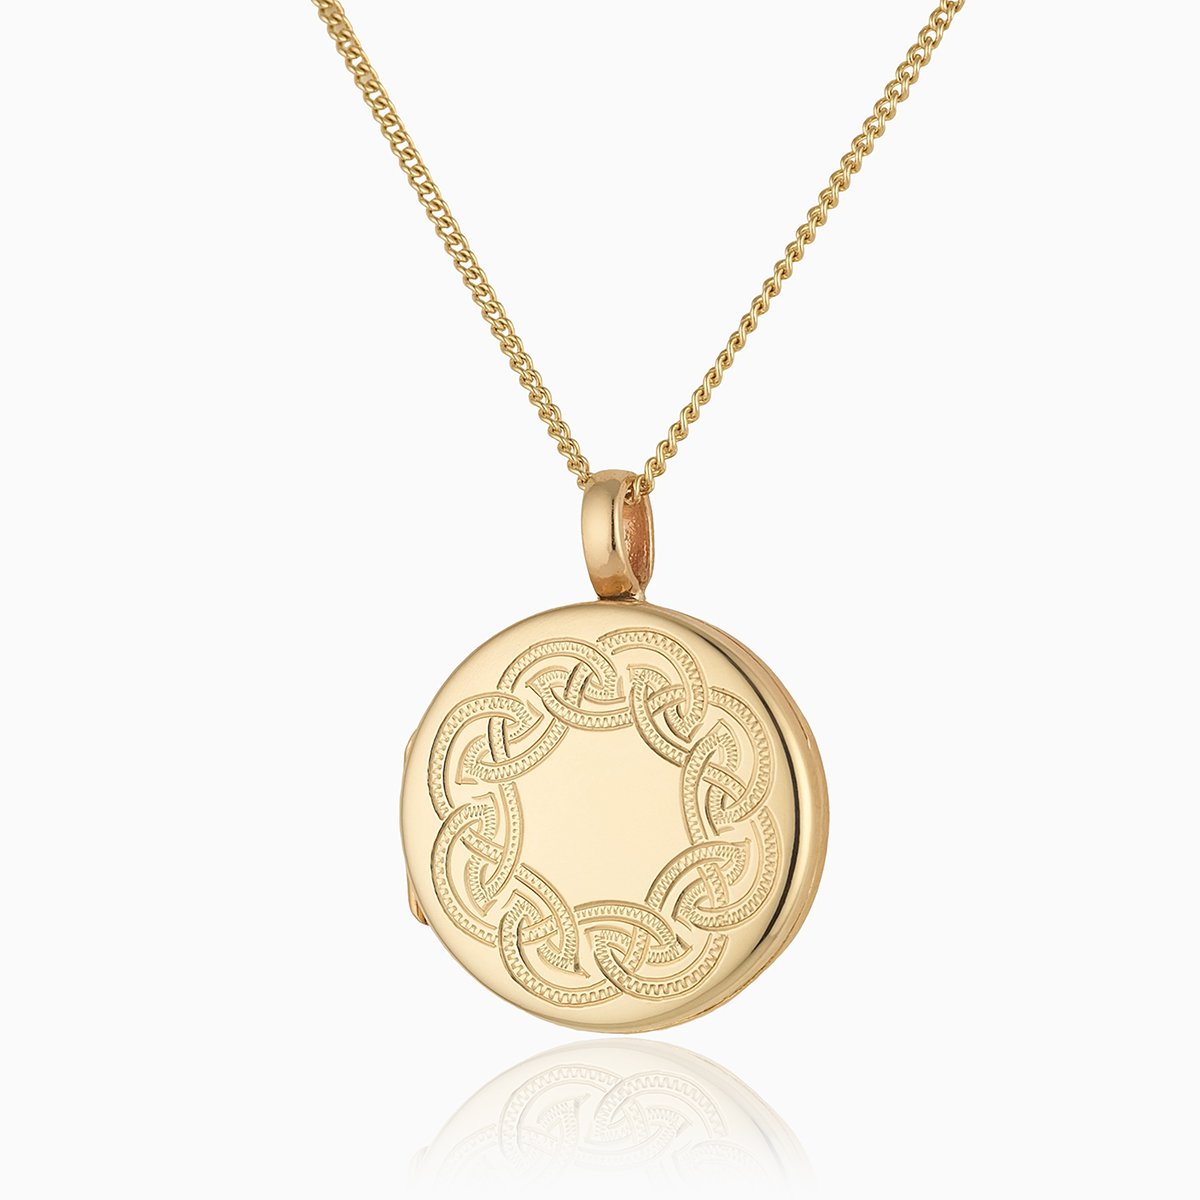 9 ct gold round locket with an engraved Celtic design border on a 9 ct gold curb chain